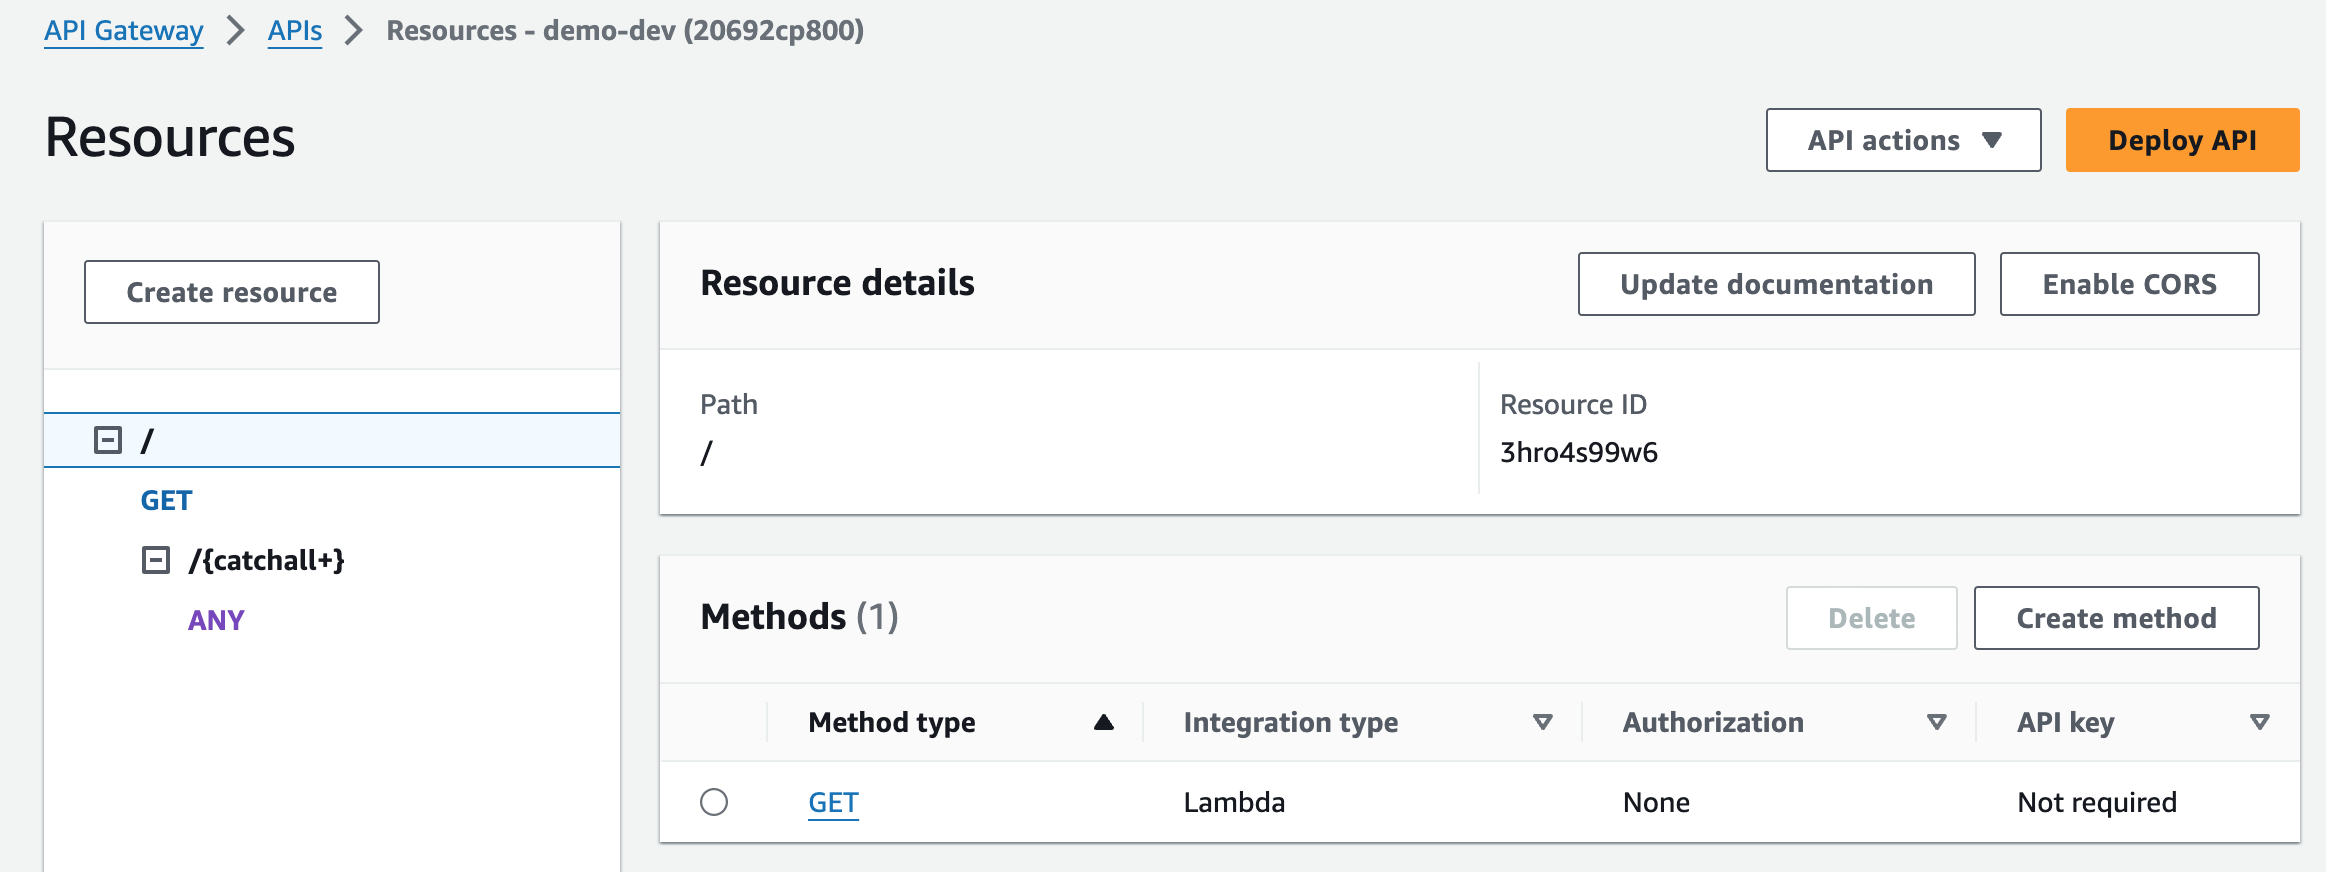 Screenshot of generated API Gateway resources in the AWS Console